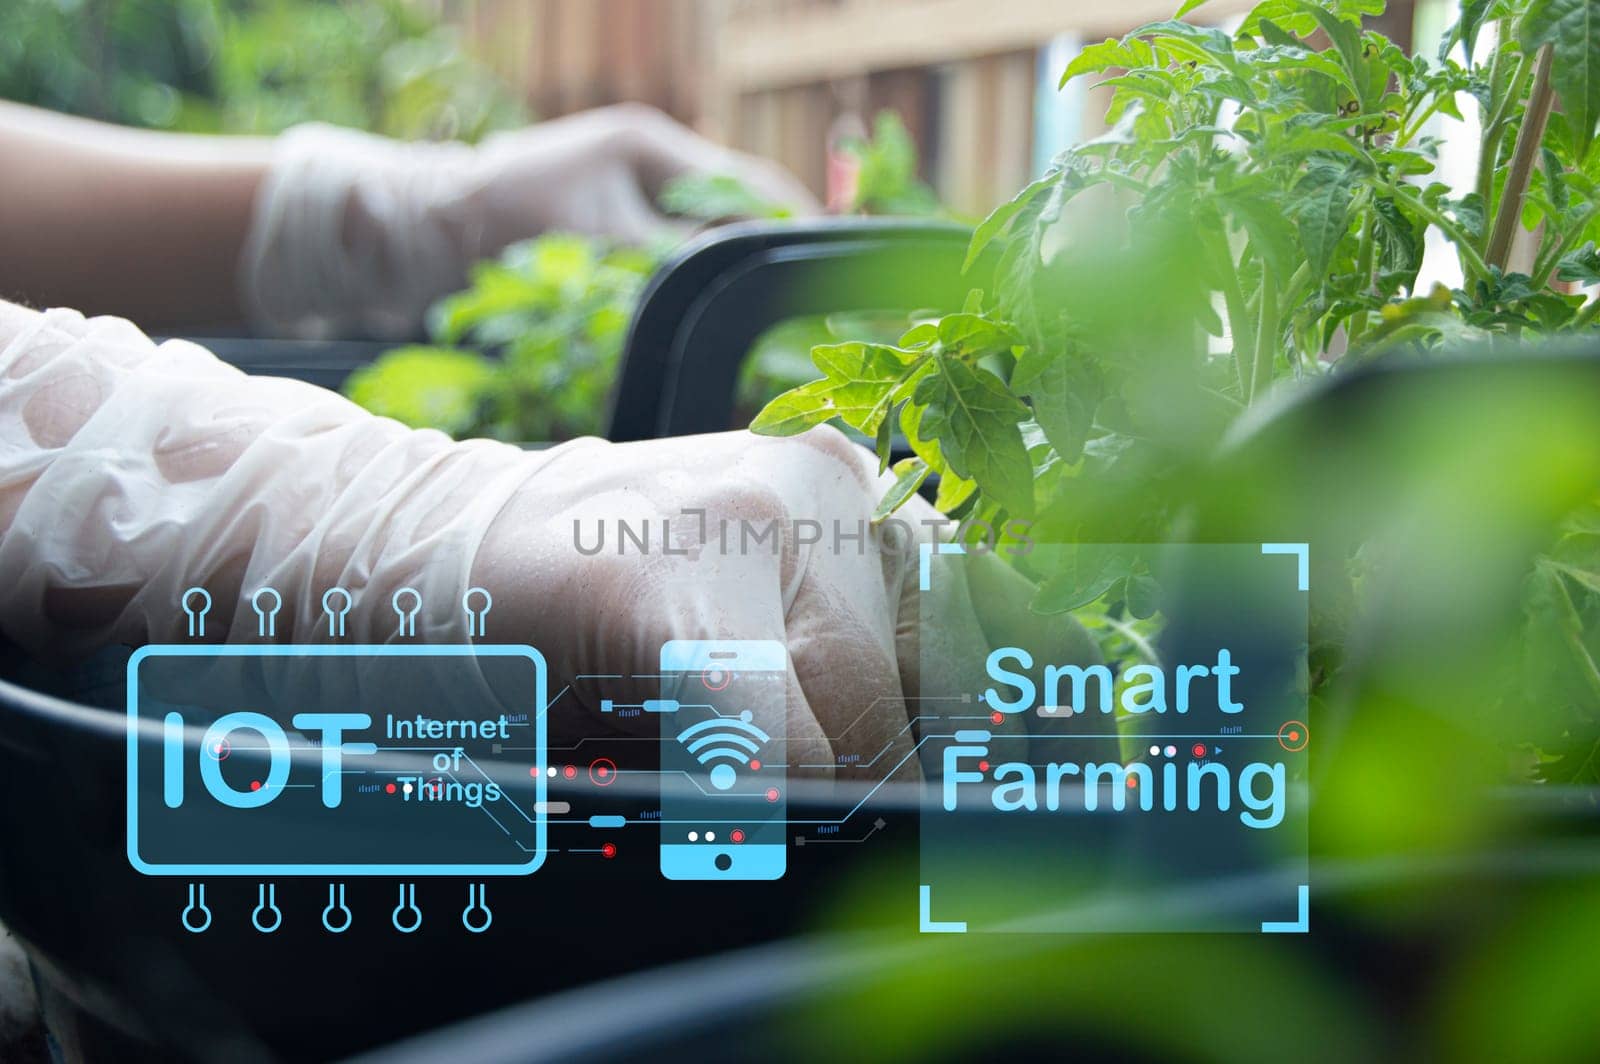 The concept of new farming or smart farming, agricultural technology